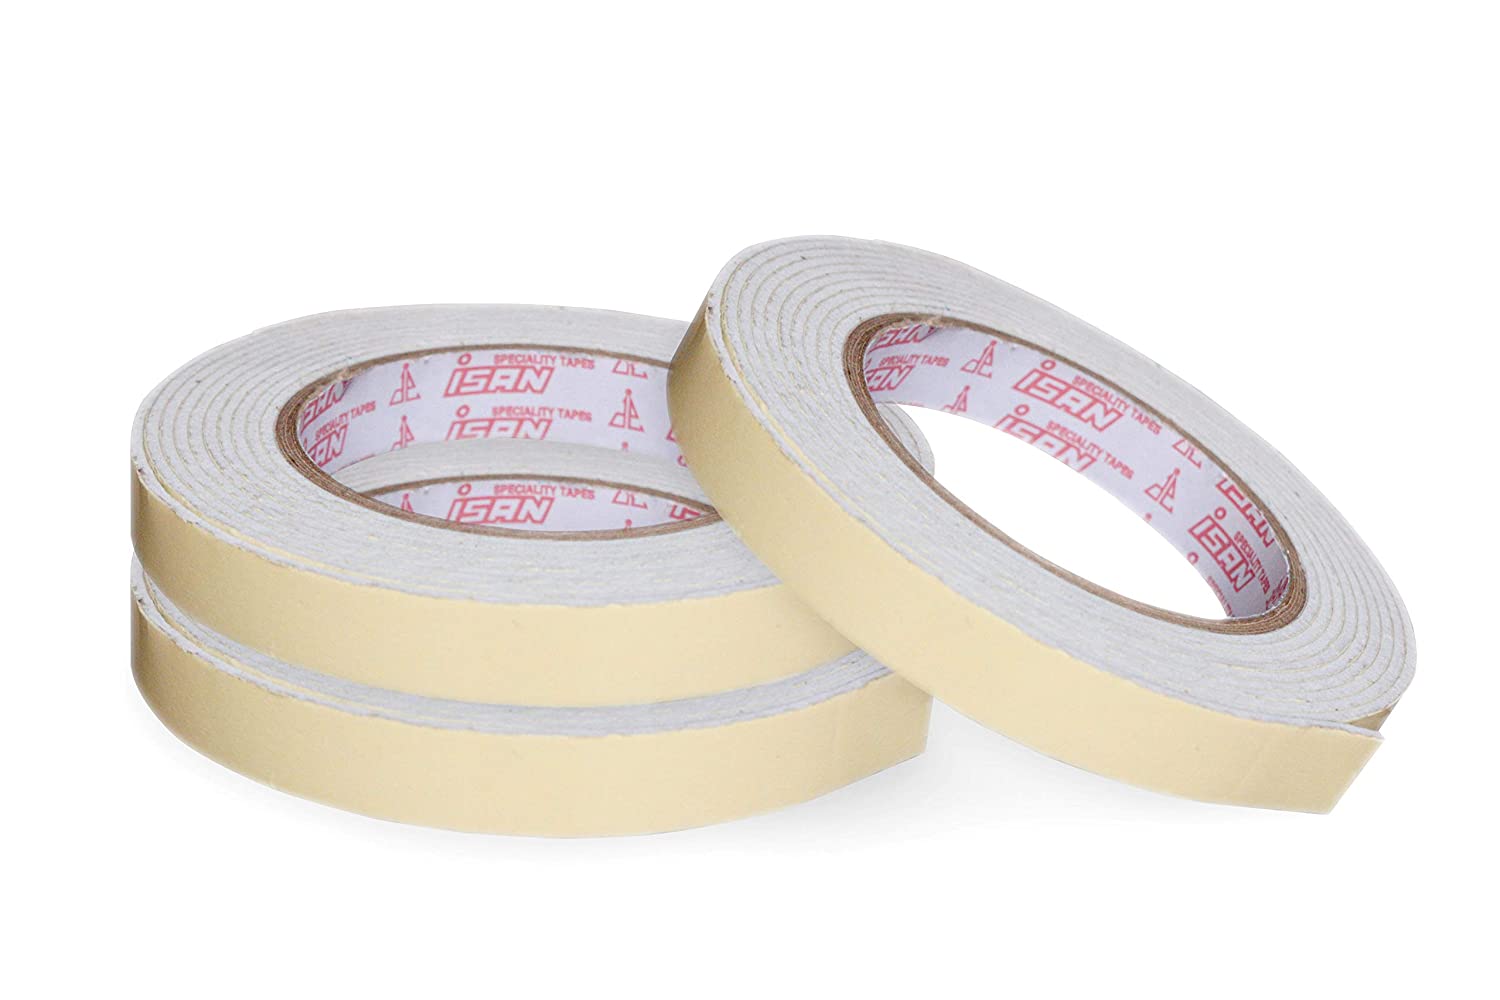 Double Sided Foam Tapes for Your Commercial and Industrial Purposes